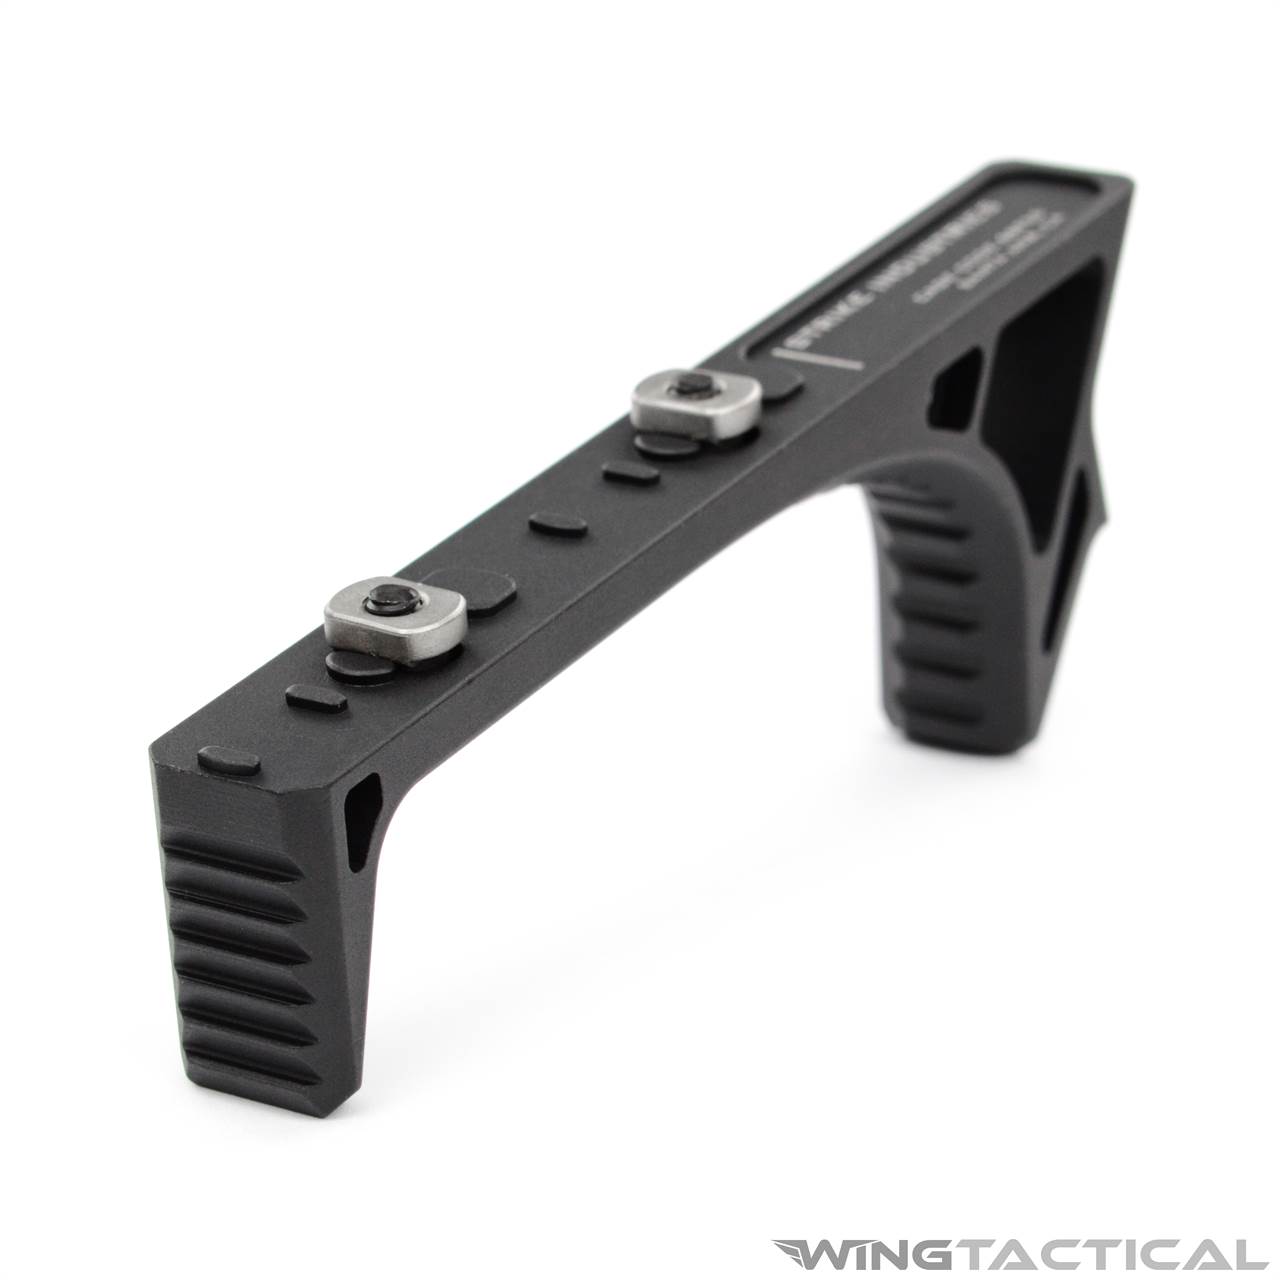 Aluminum LINK Curved Angled Foregrip Front Grip Fits For KeyMod Handguard Rails 